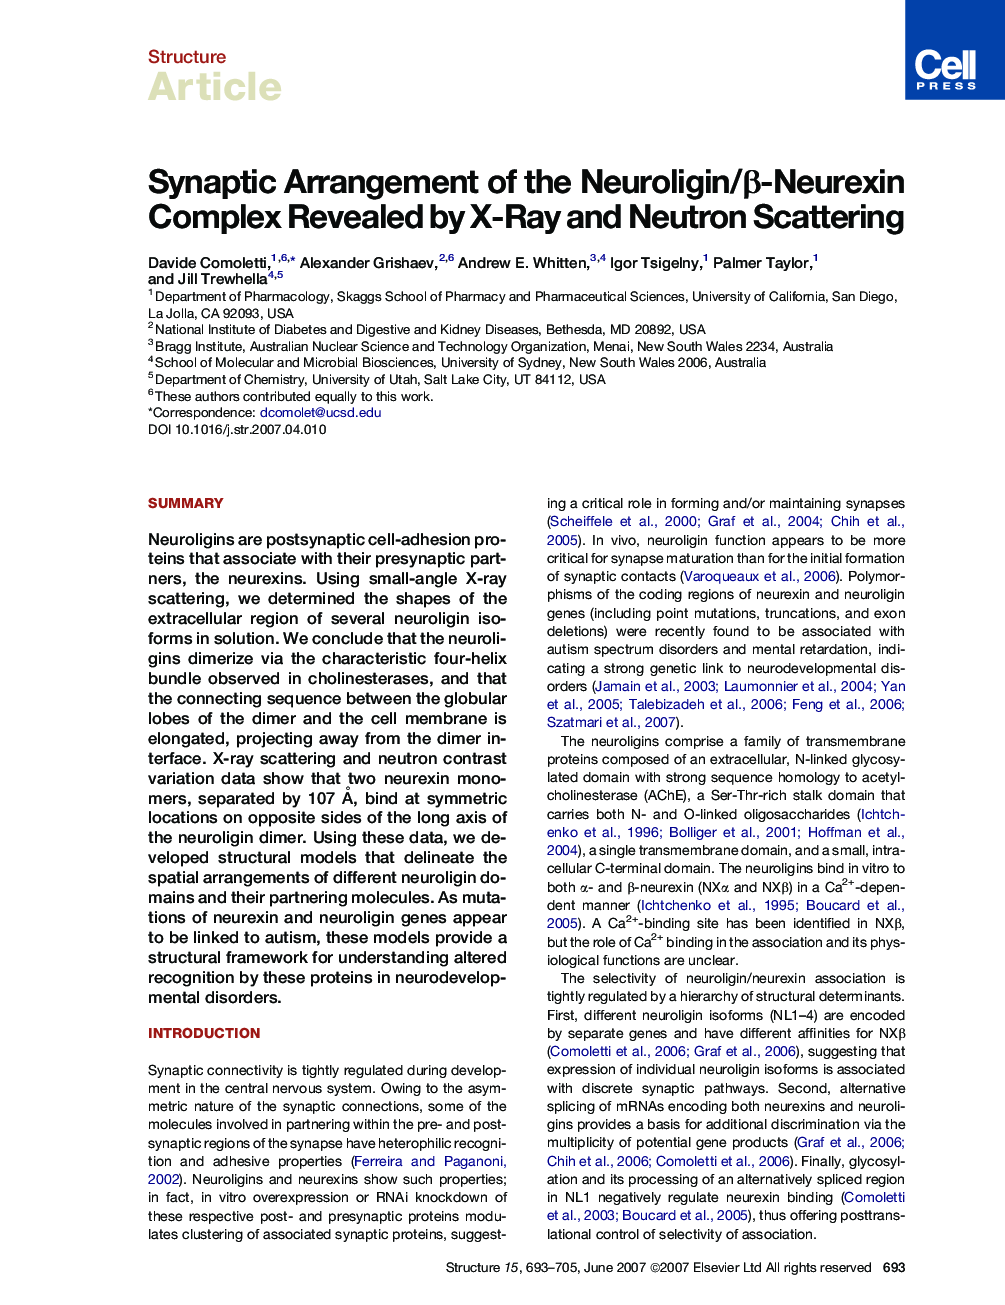 Synaptic Arrangement of the Neuroligin/β-Neurexin Complex Revealed by X-Ray and Neutron Scattering